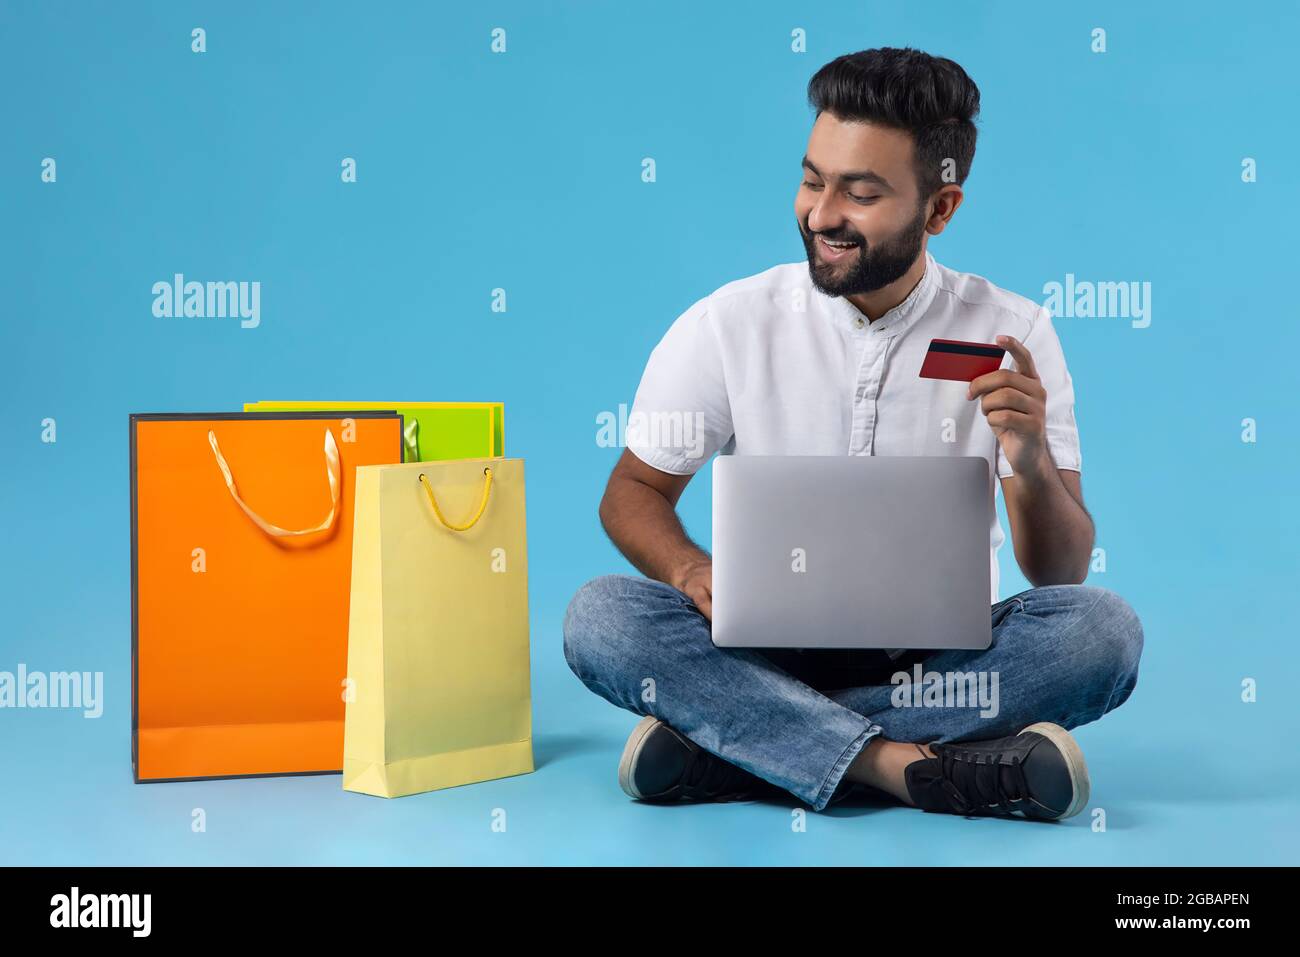 A YOUNG BEARDED MAN LOOKING AT SHOPPING BAGS WHILE HOLDING DEBIT CARD Stock Photo